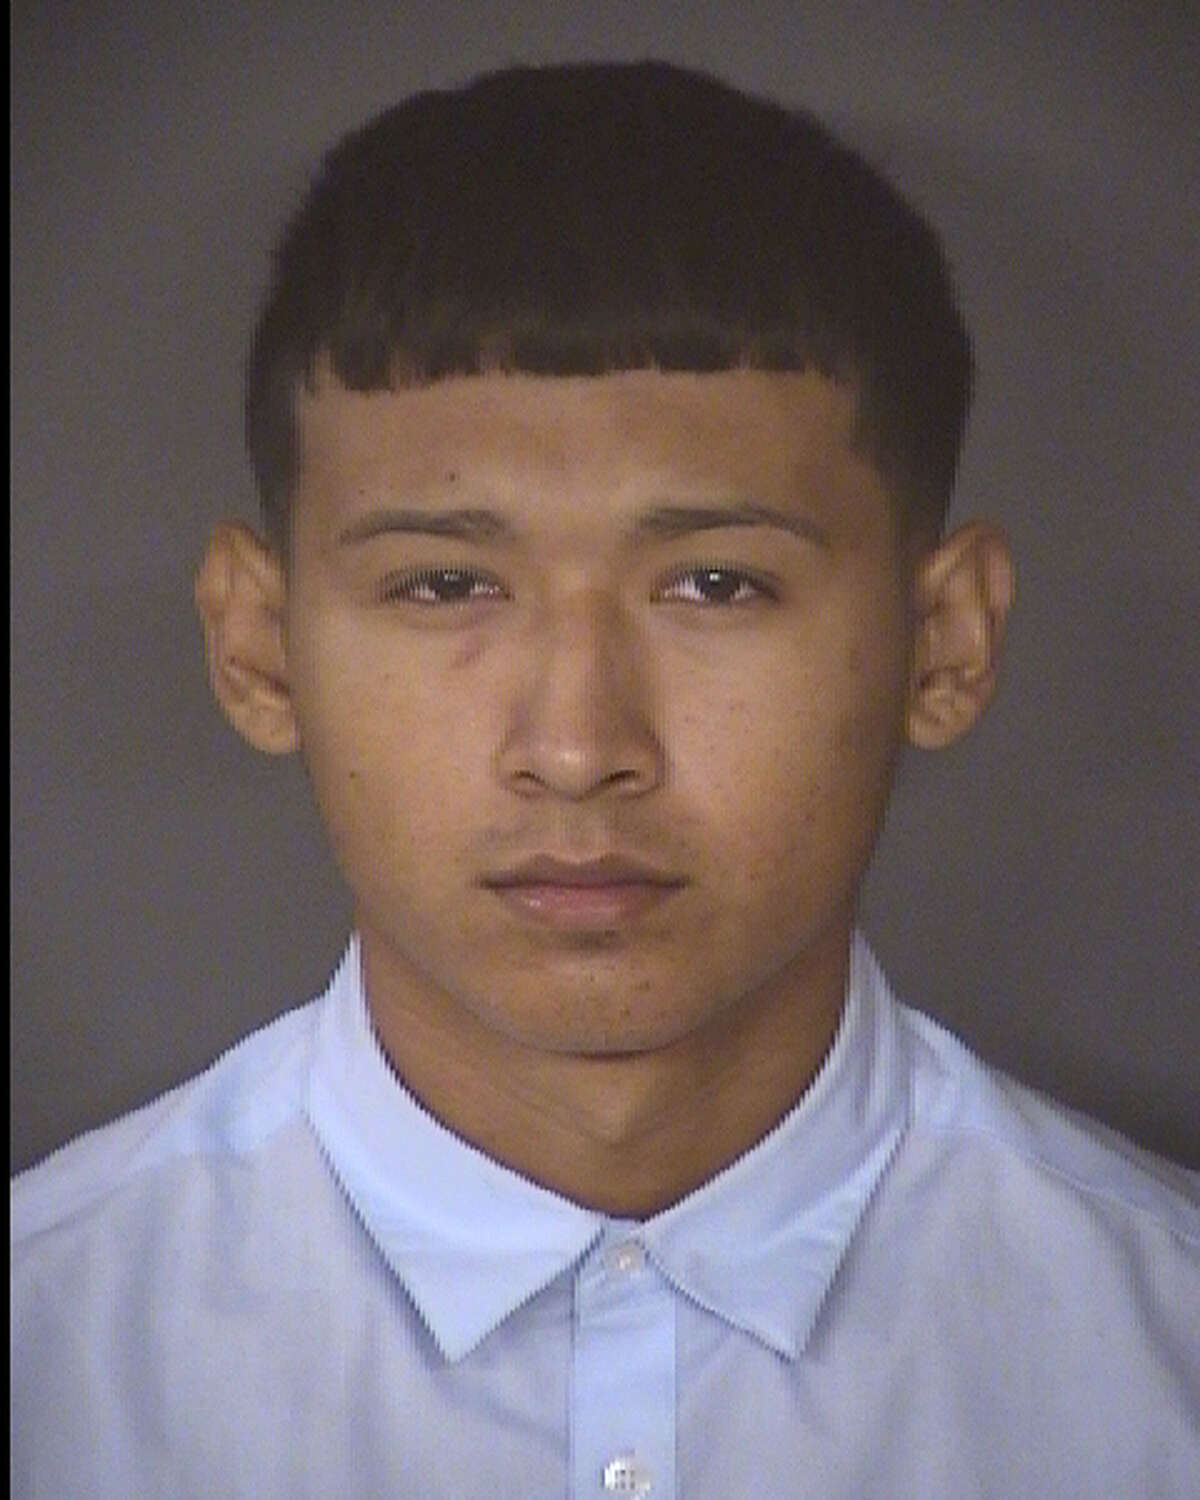 Twenty-year-old Joshua Garcia, pictured in this 2017 booking photo, faces a murder charge in the death of Erin Castro, 19.